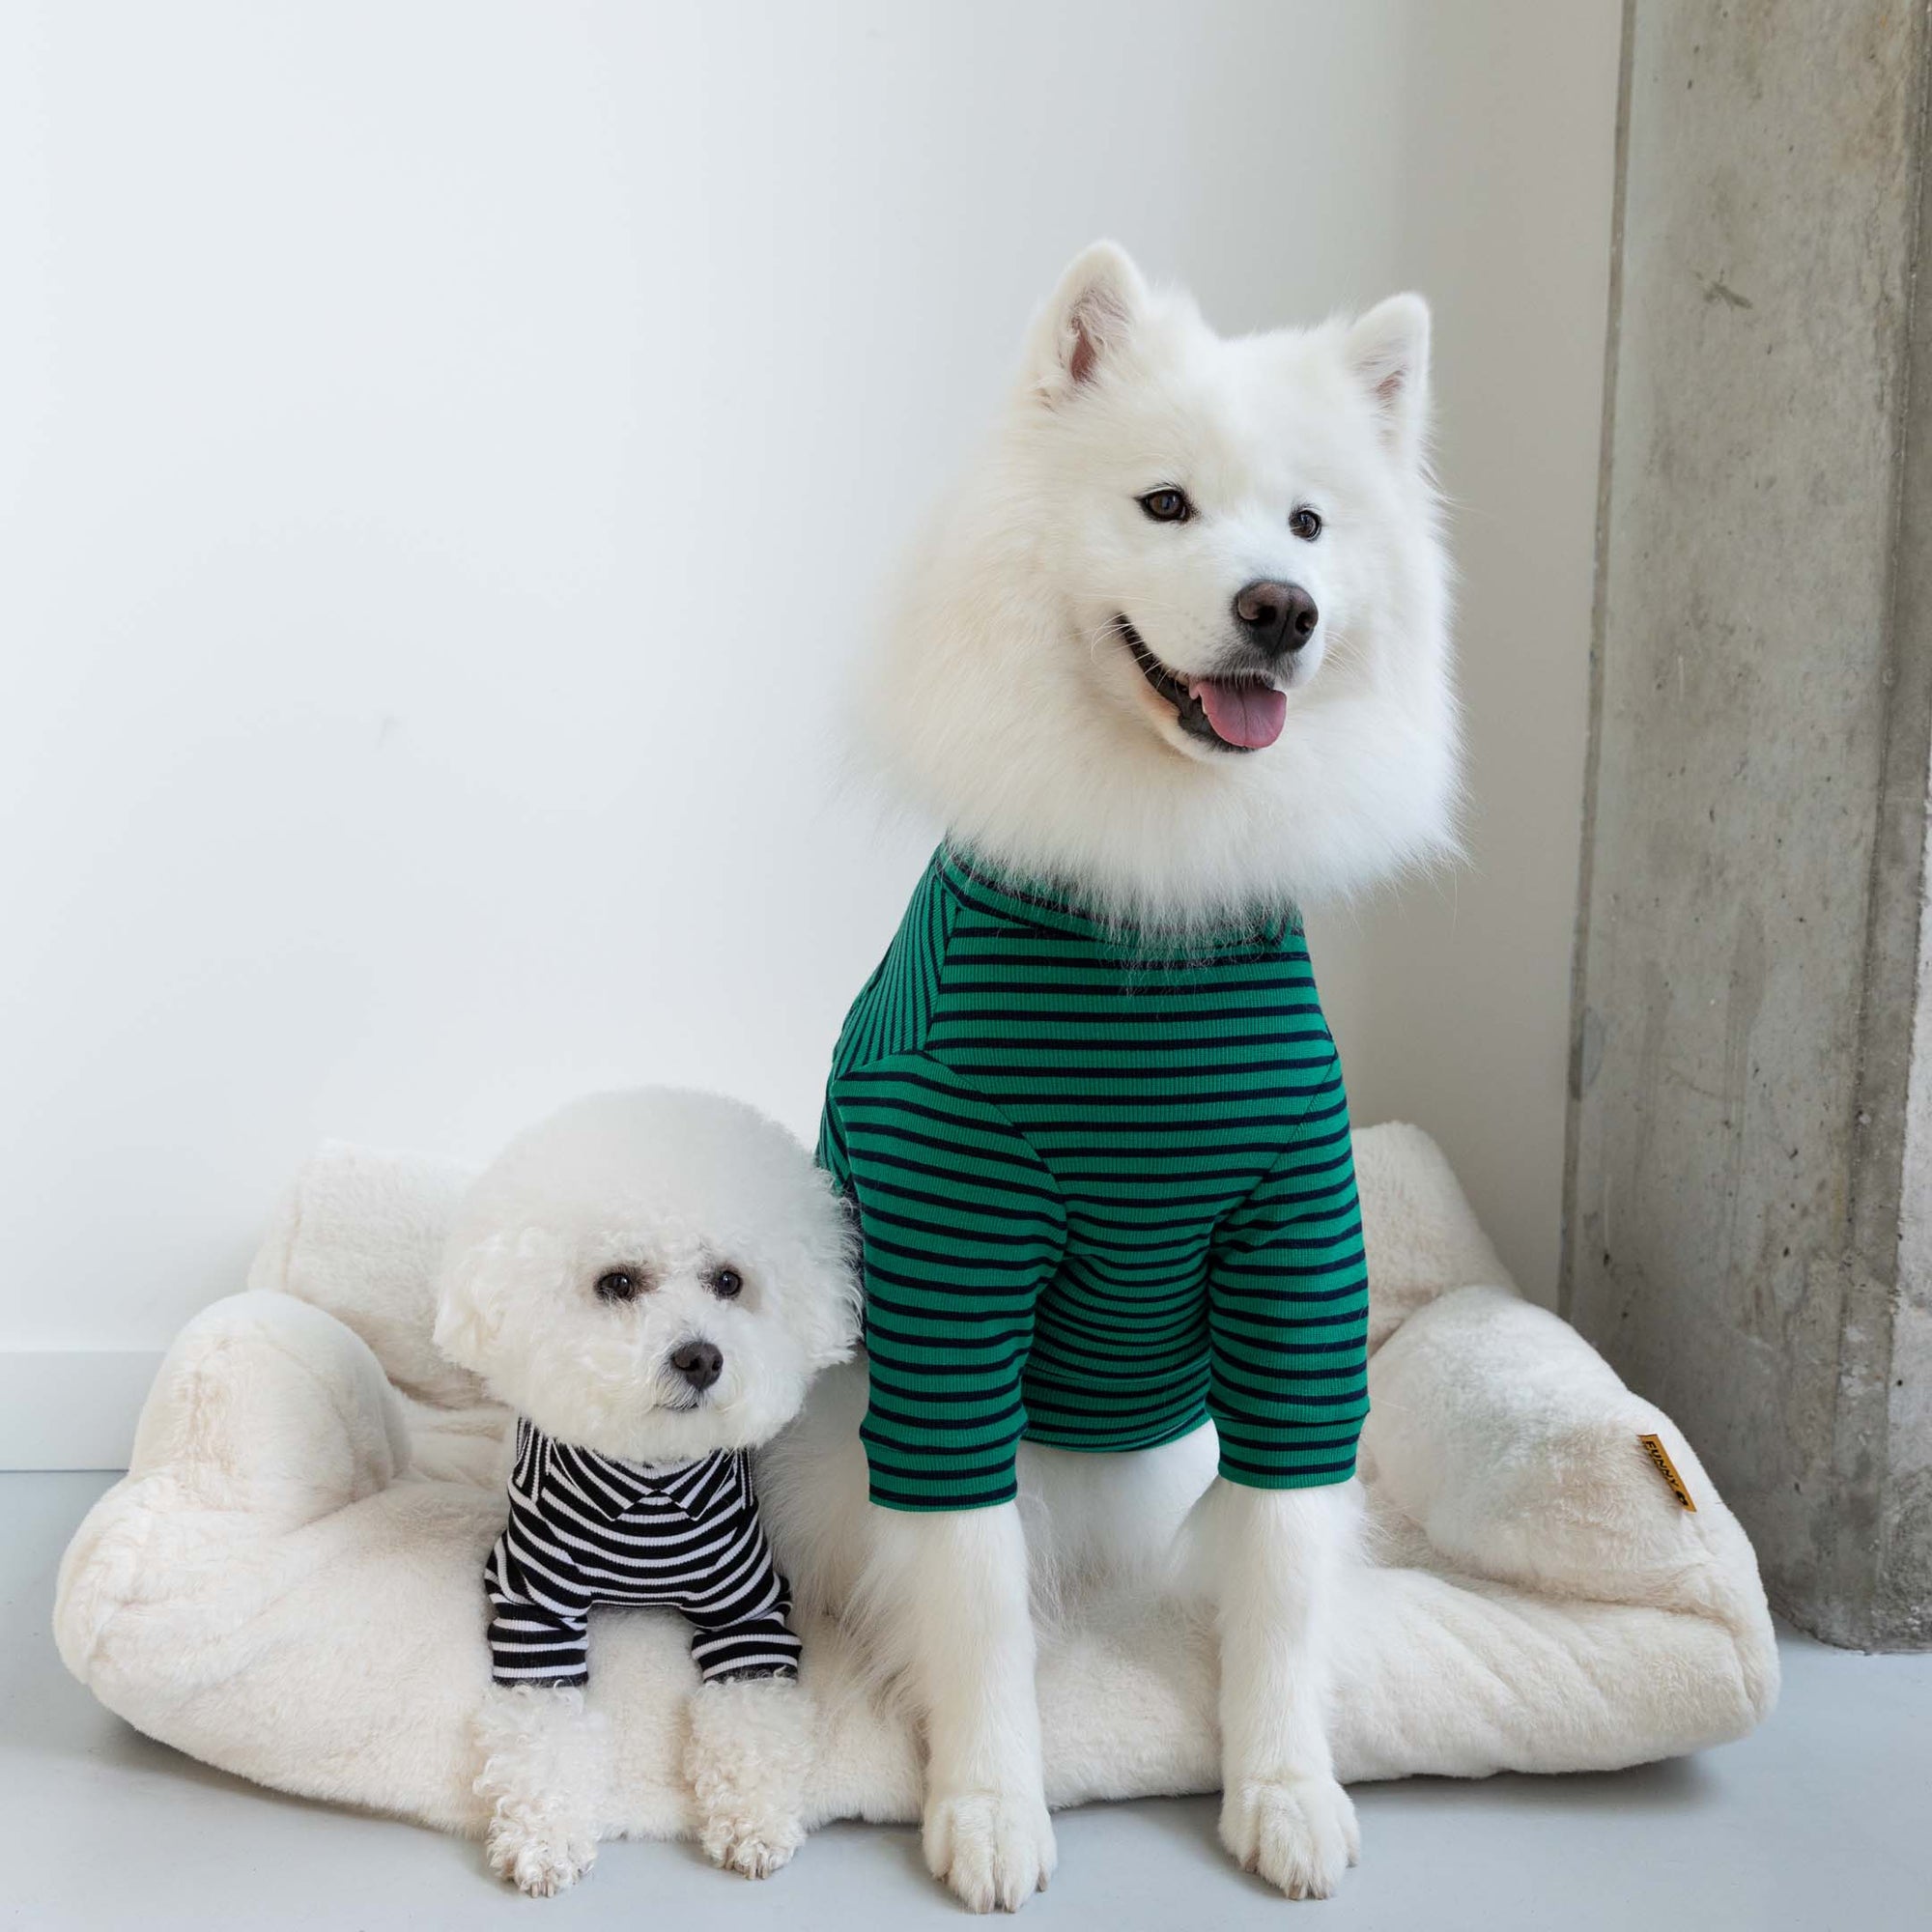 Cheerful Samoyed and Bichon Frise side by side, wearing striped dog shirts in black and teal, embodying pet companionship.